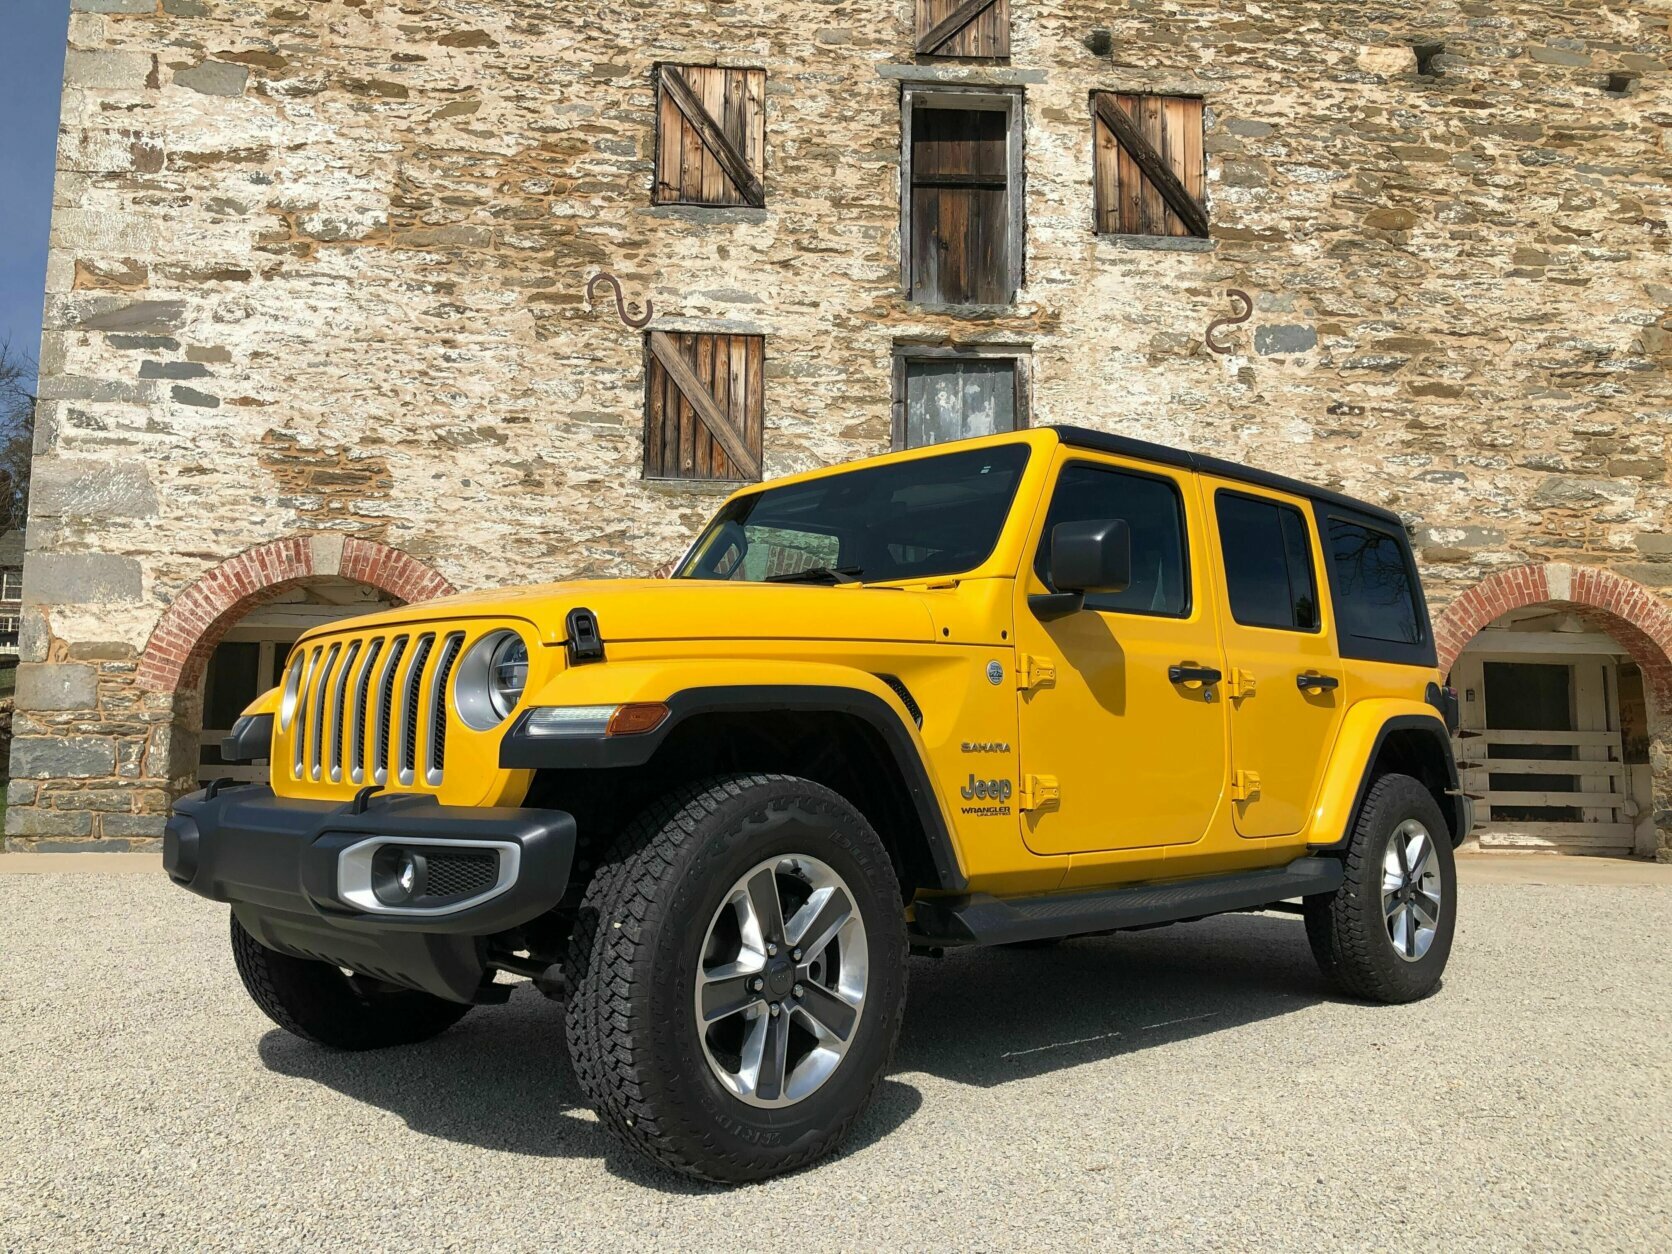 Car Review Jeep Wrangler Unlimited Sahara learns to use less fuel with